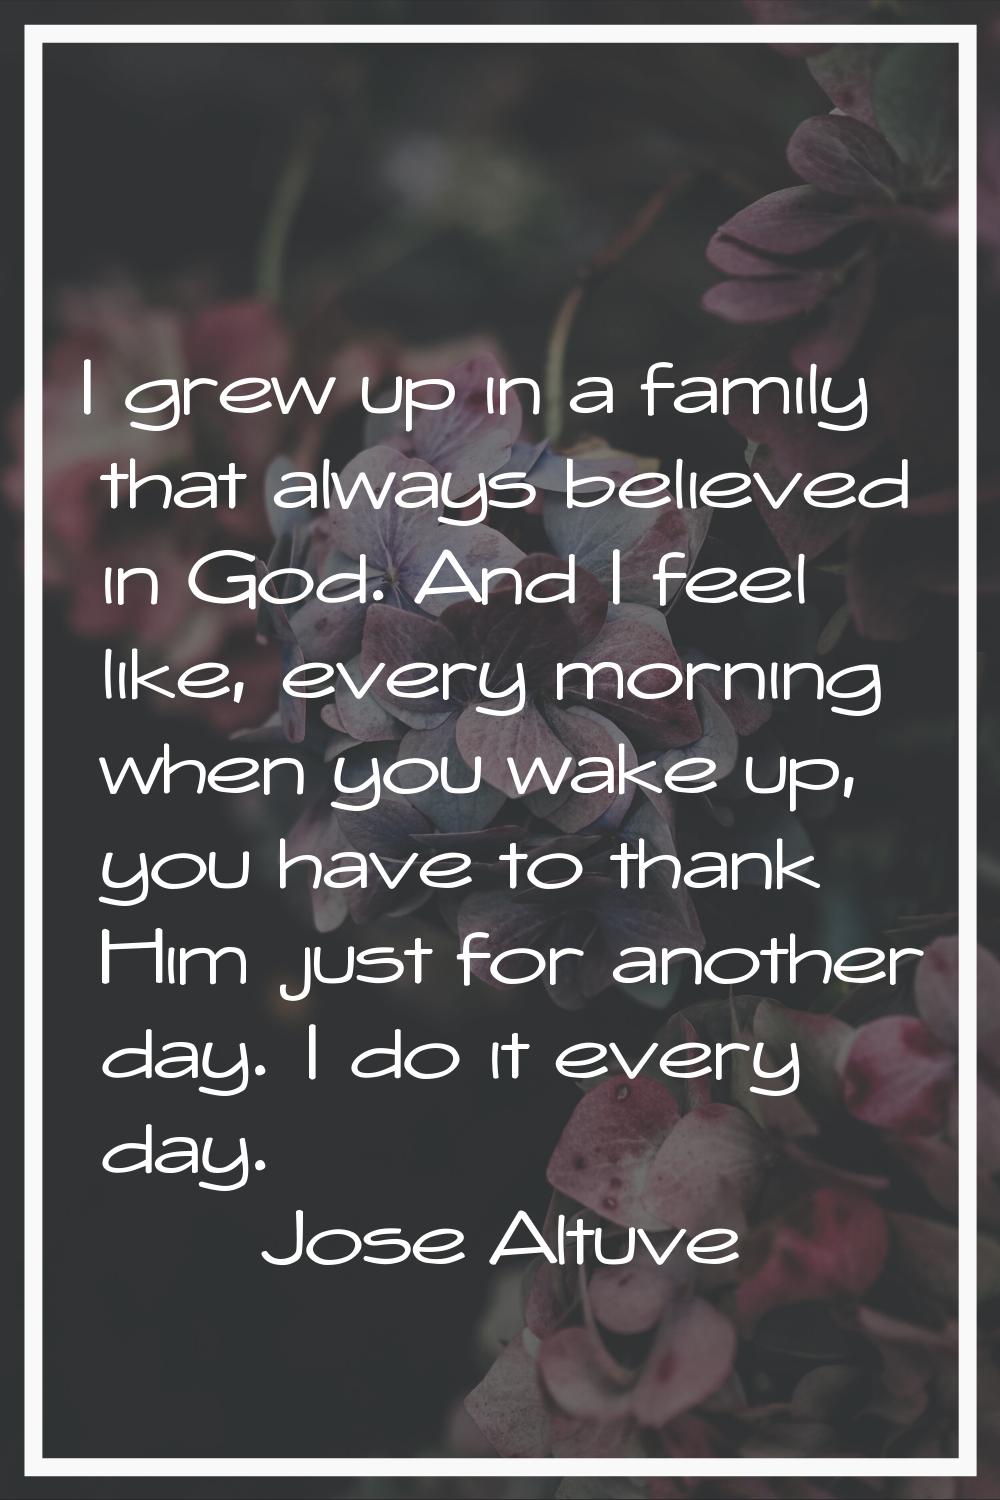 I grew up in a family that always believed in God. And I feel like, every morning when you wake up,